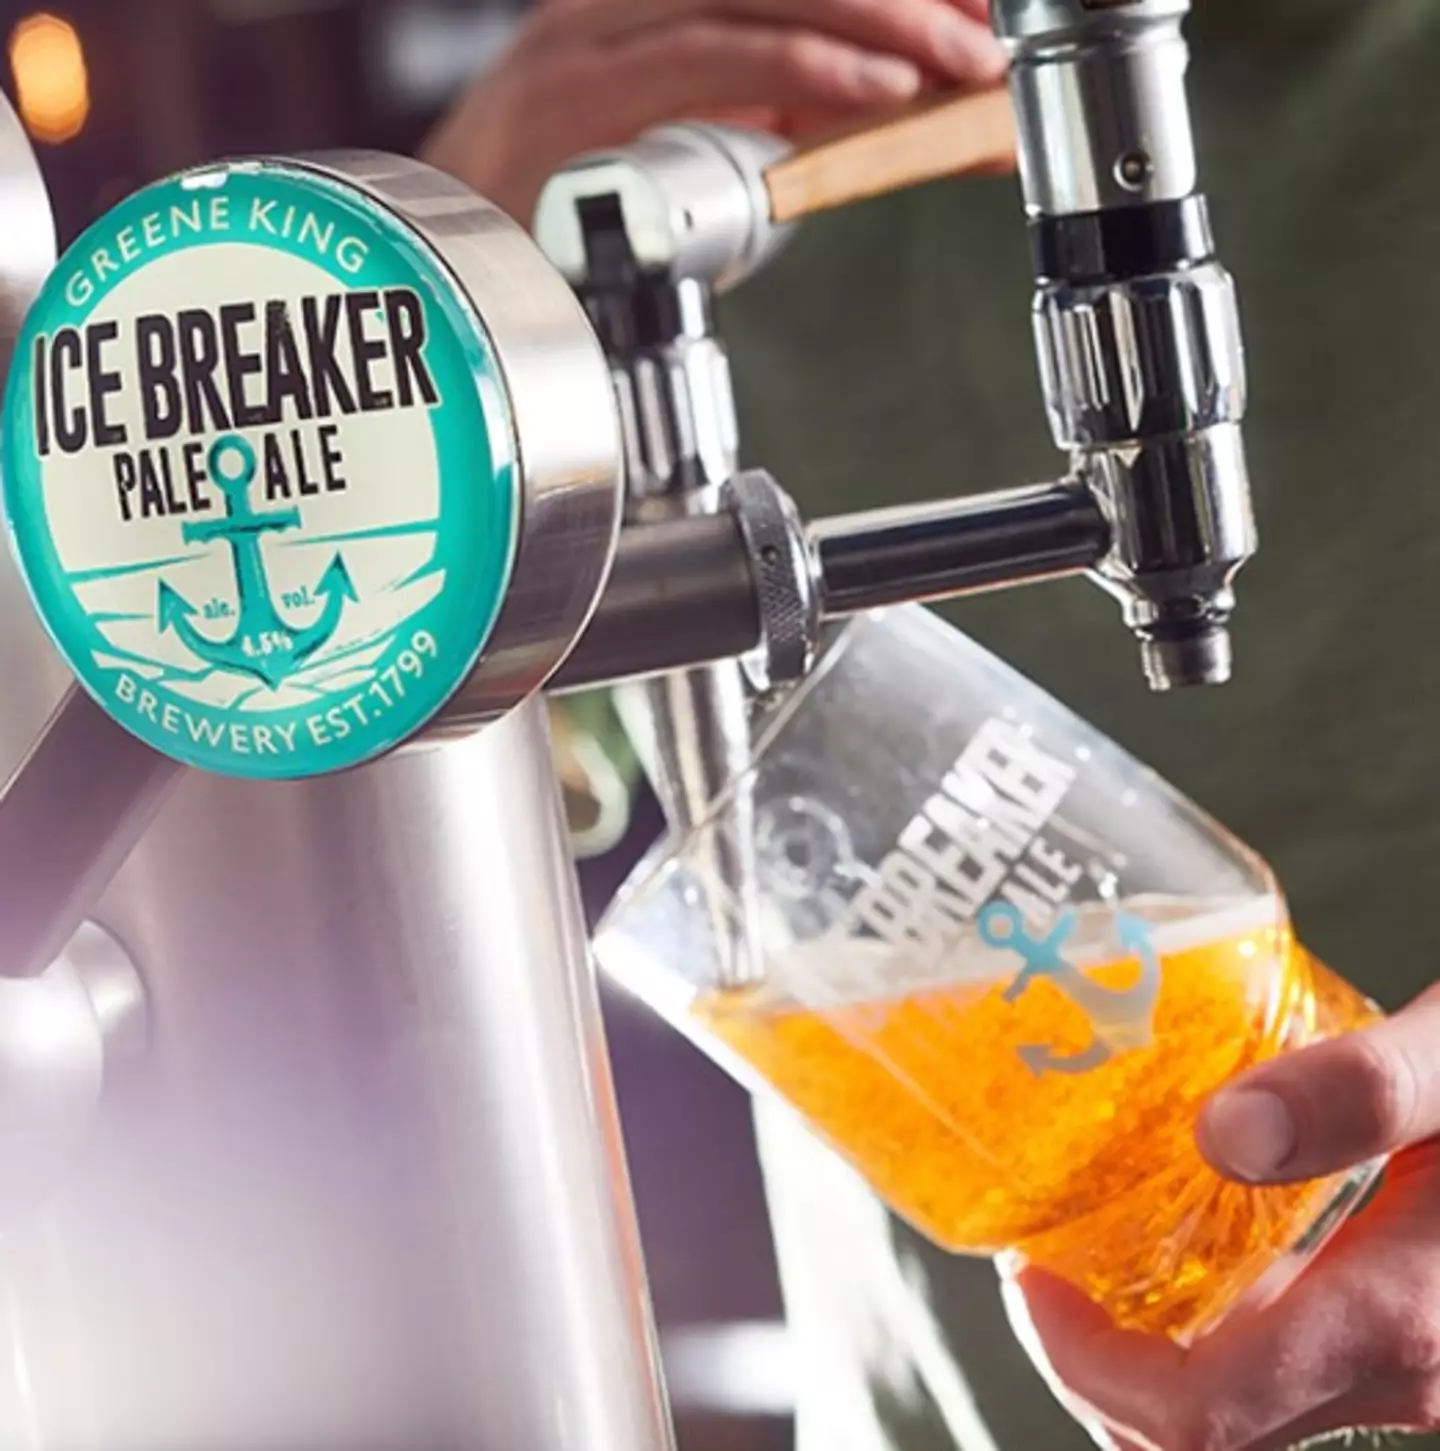 You can get your hands on some ice breaker pale ale.